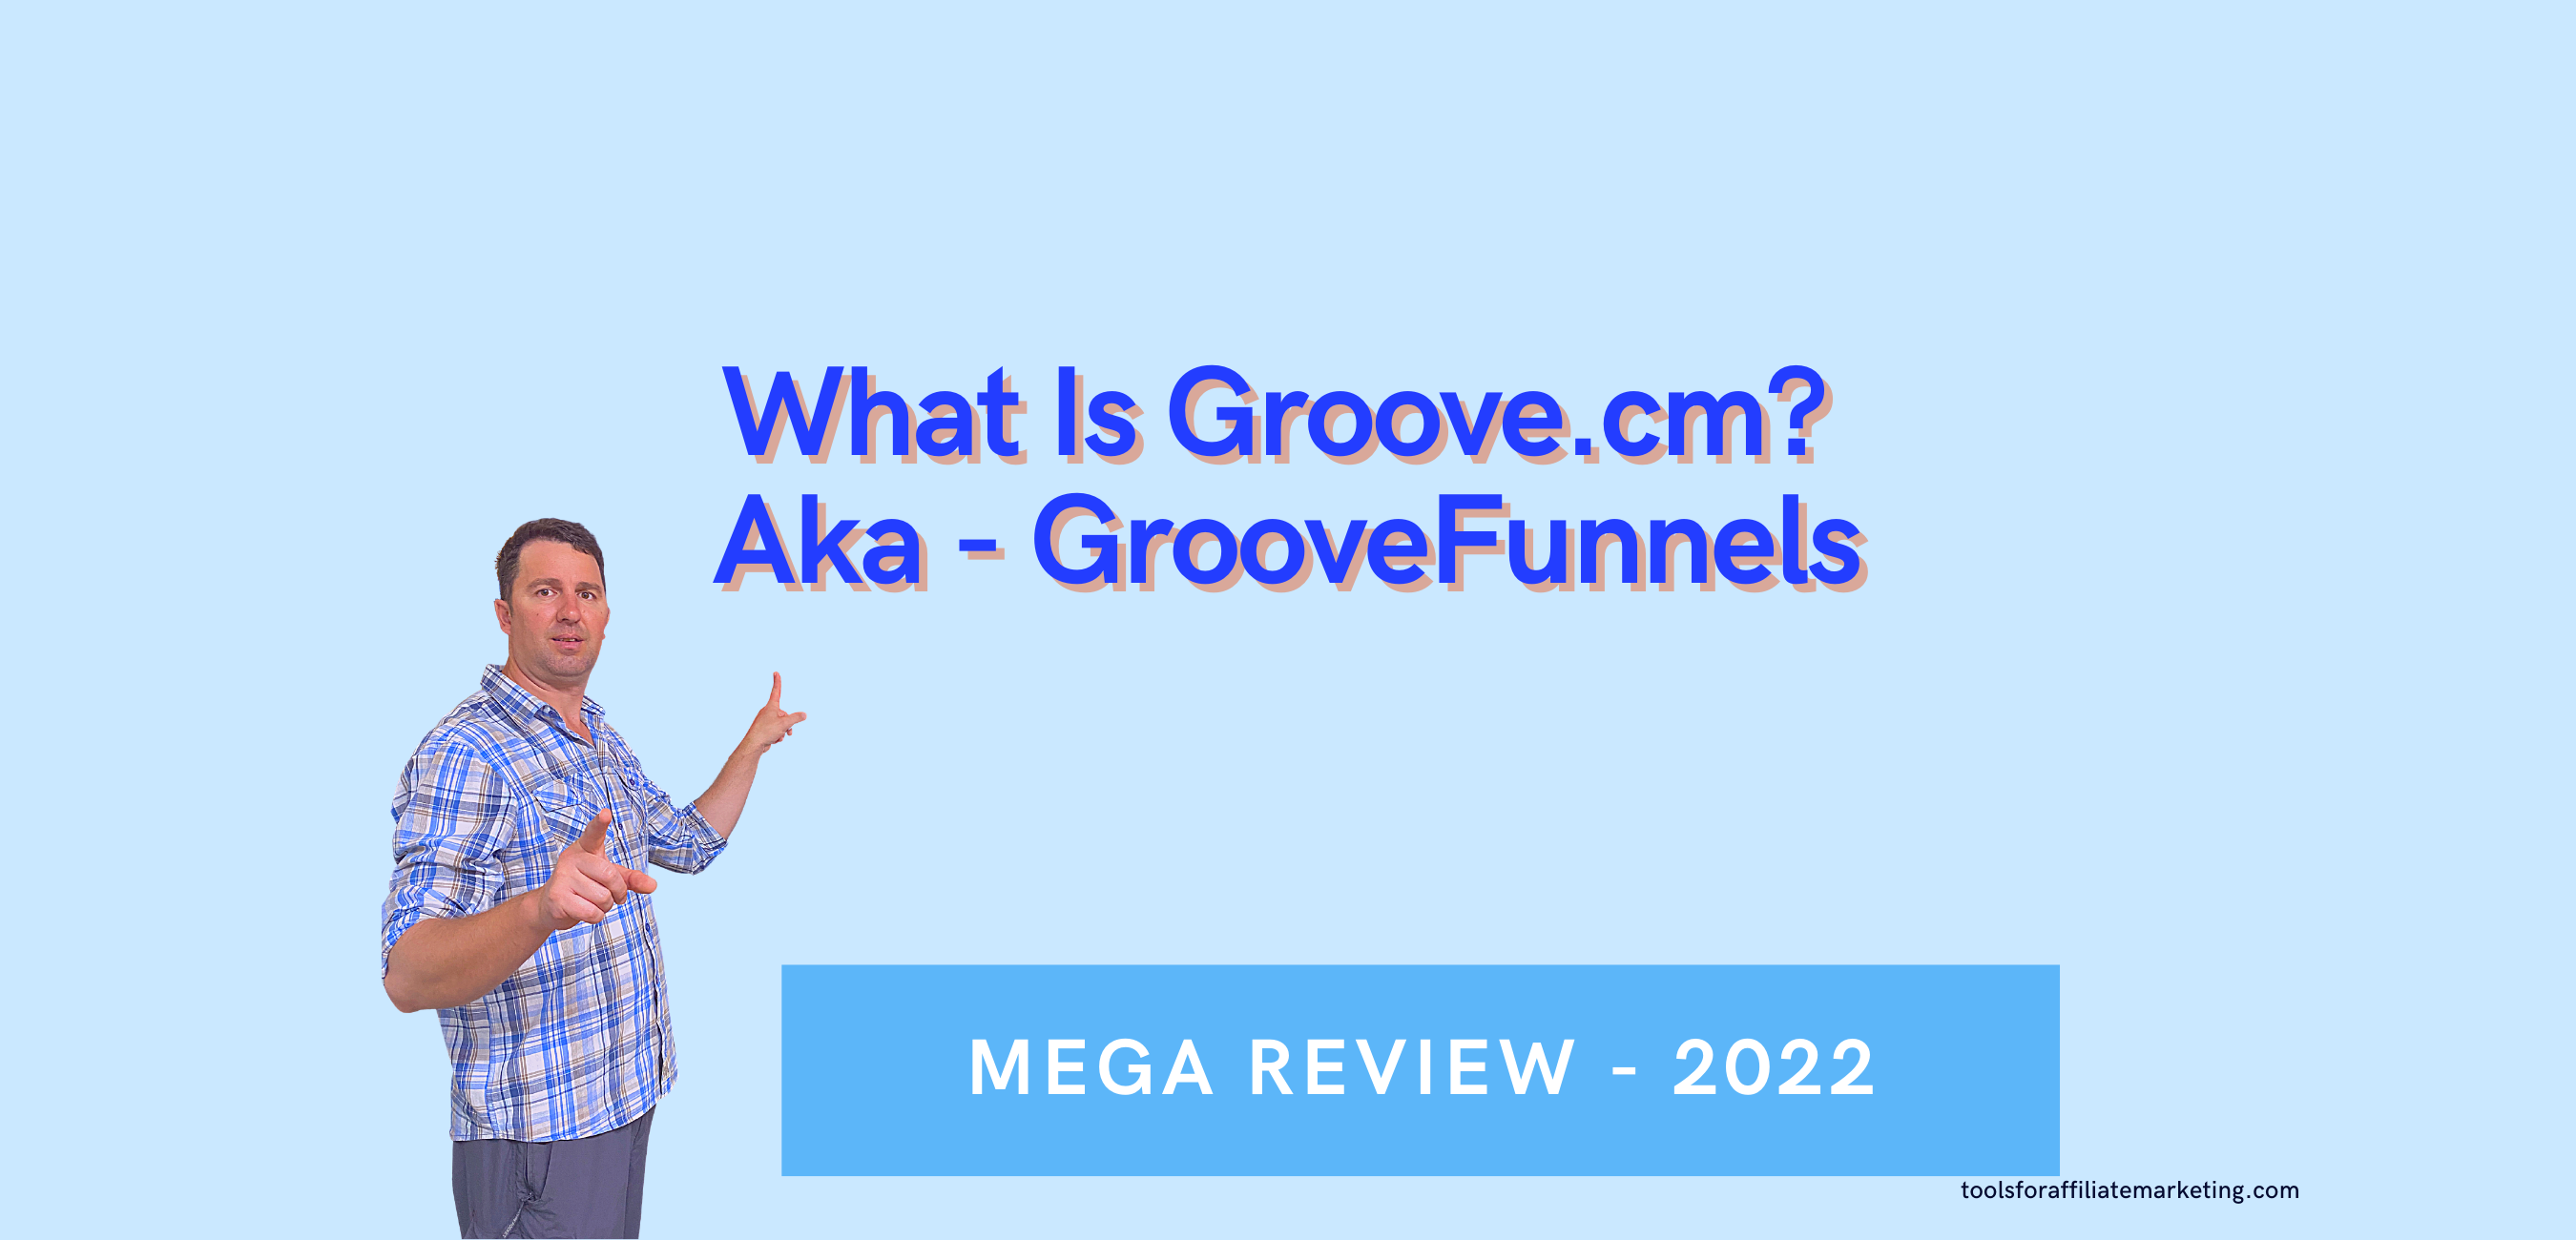 What Is GrooveFunnels? Groove.cm  [2022 Mega Review]